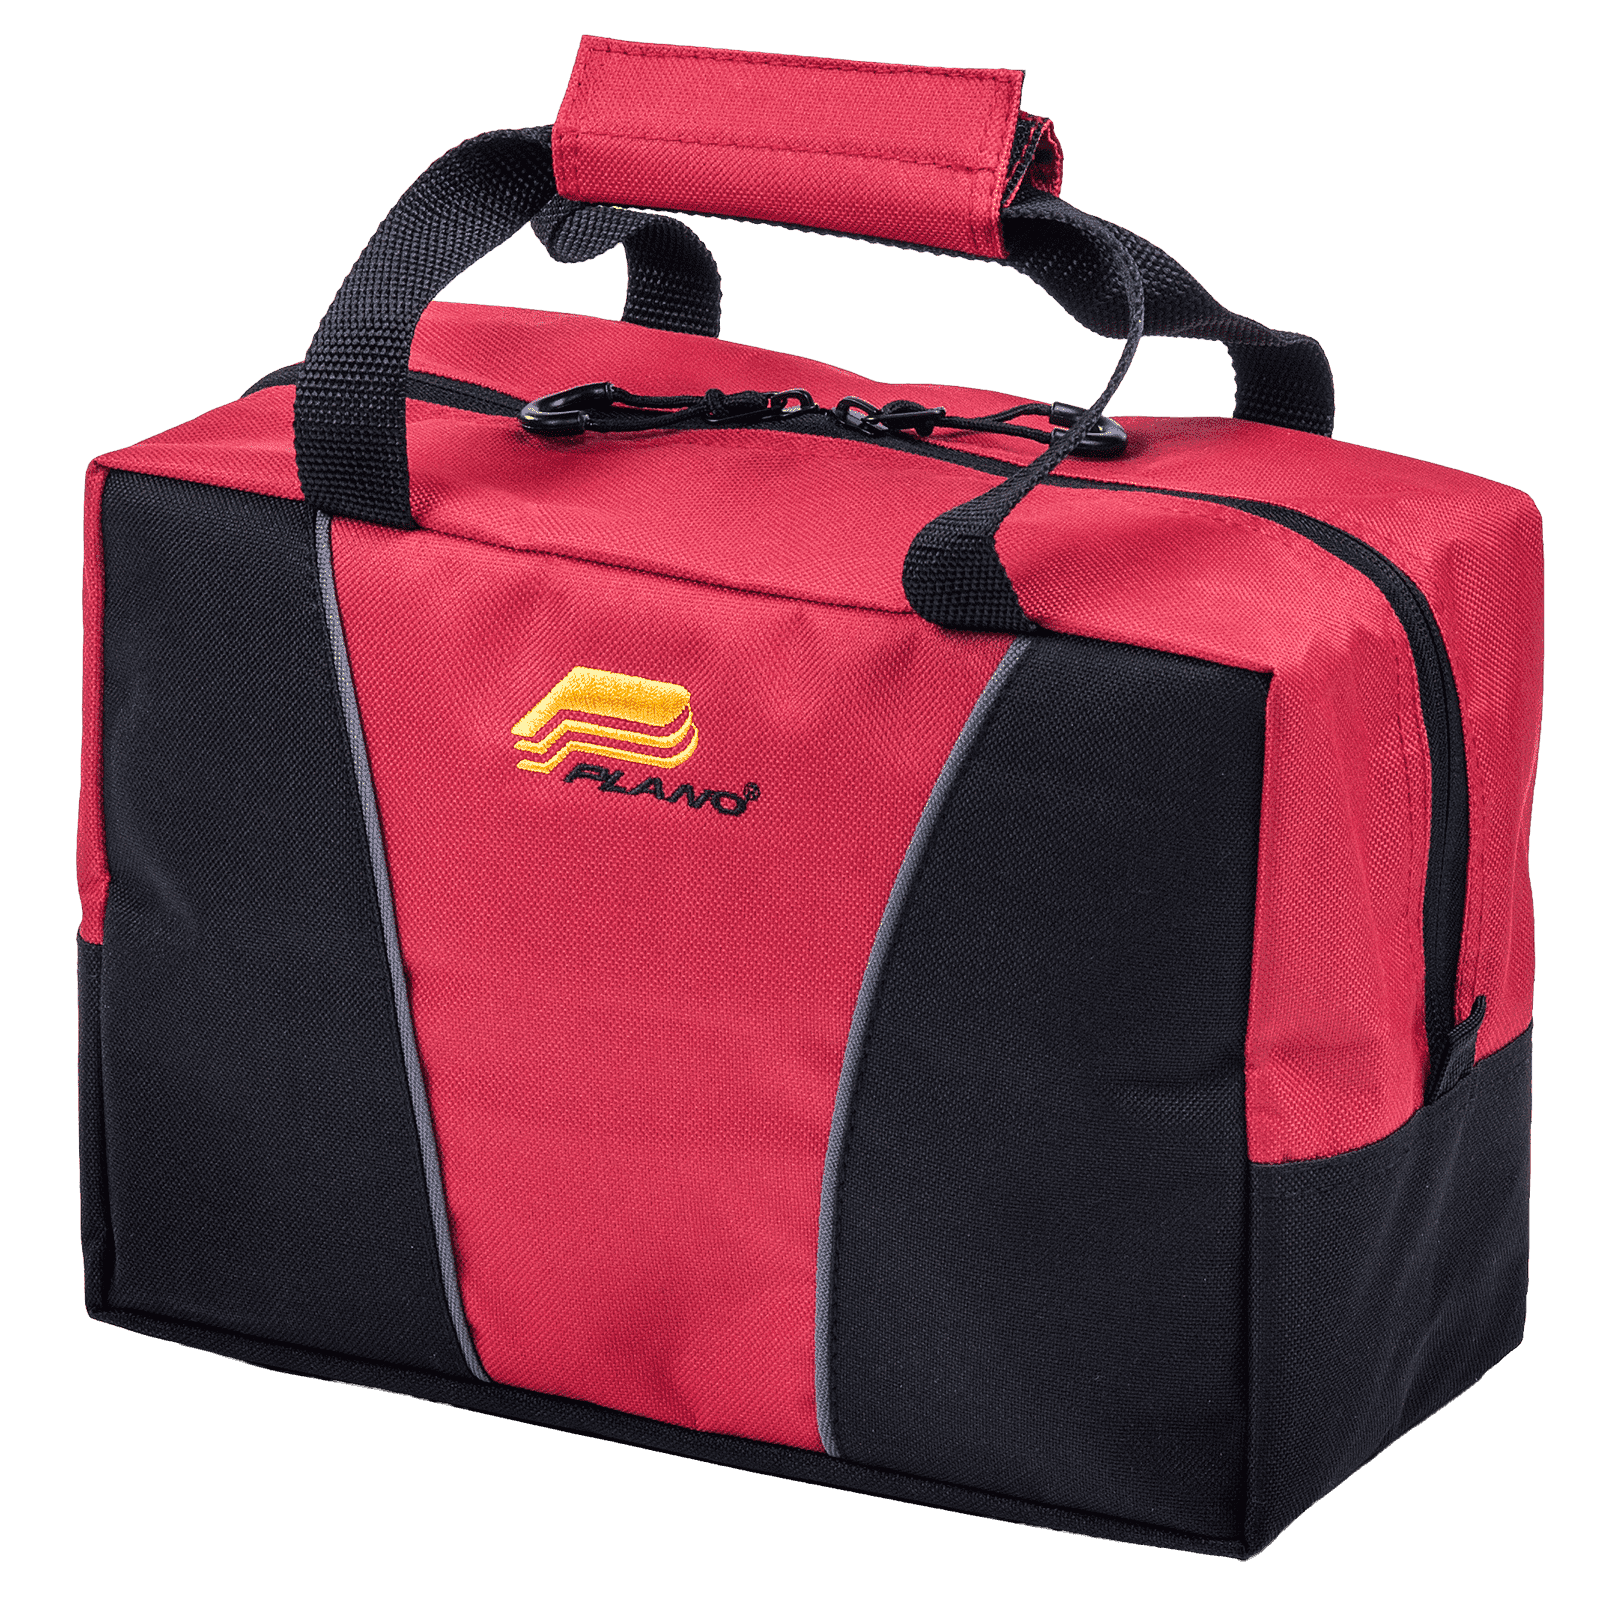 X-Strike Fishing Tackle Bag, Fishing Box Bag with 7 3700 Tackle Boxes Extra  Large Fishing Gear Storage Bag Water-Resistant Tackle Bags Padded Shoulder